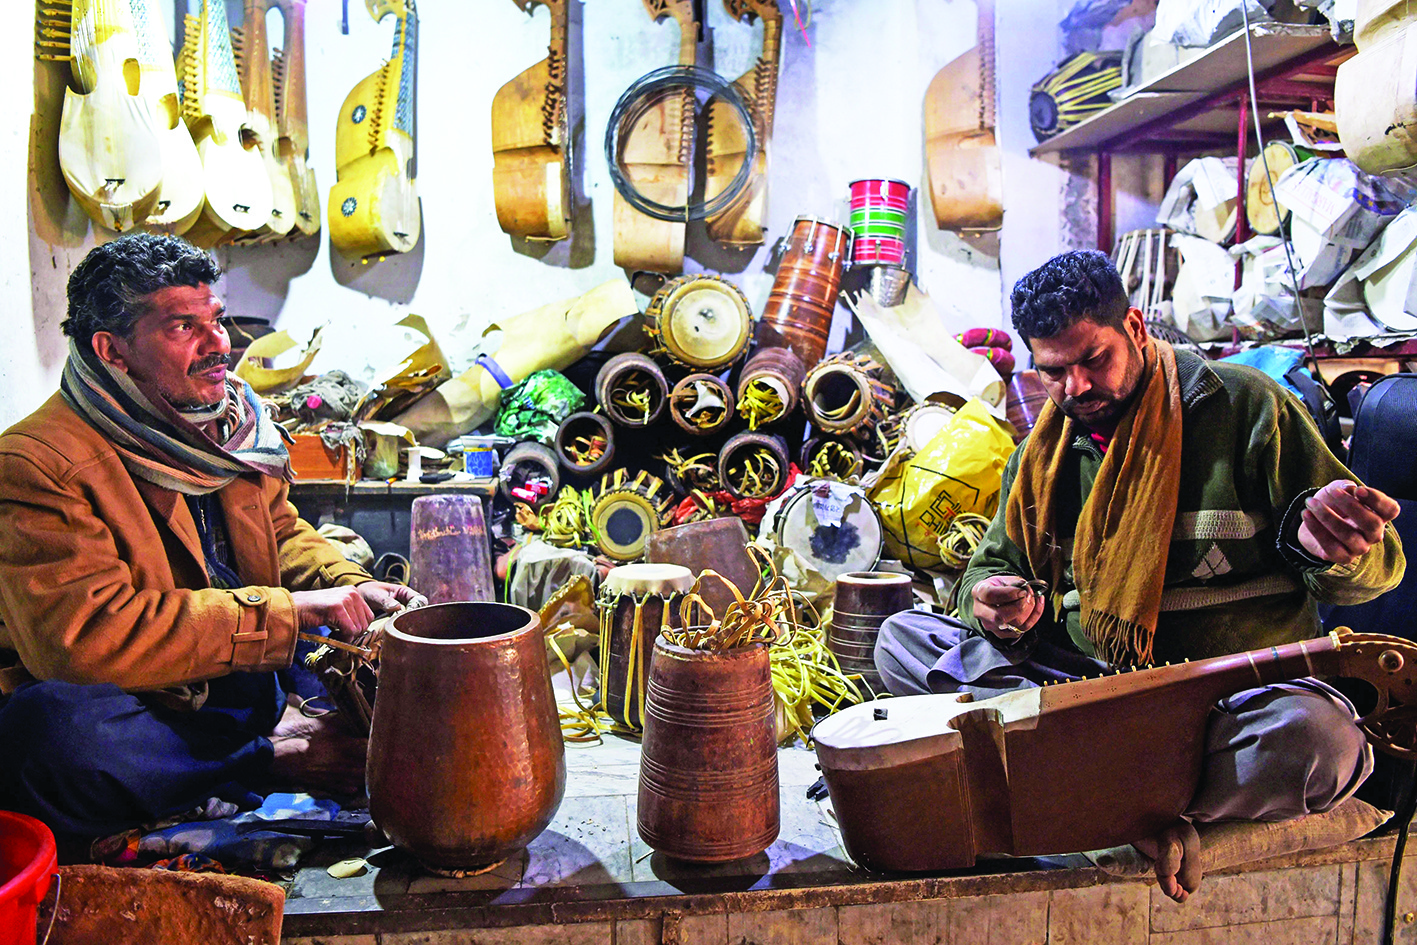 In this picture taken on December 3, 2019, workers make traditional rabab musical instruments in a workplace on the outskirts of Peshawar. - For years the distinctive twang of Pashtun music was drowned out by rattling gunfire and deafening explosions as musicians in Pakistan's northwest were targeted by militants. But, as security improves, a centuries-old tribal tradition is staging a comeback. (Photo by Abdul MAJEED / AFP) / TO GO WITH Pakistan-Taliban-militancy-music-culture,FOCUS by David STOUT and Sajjad TARAKZAI